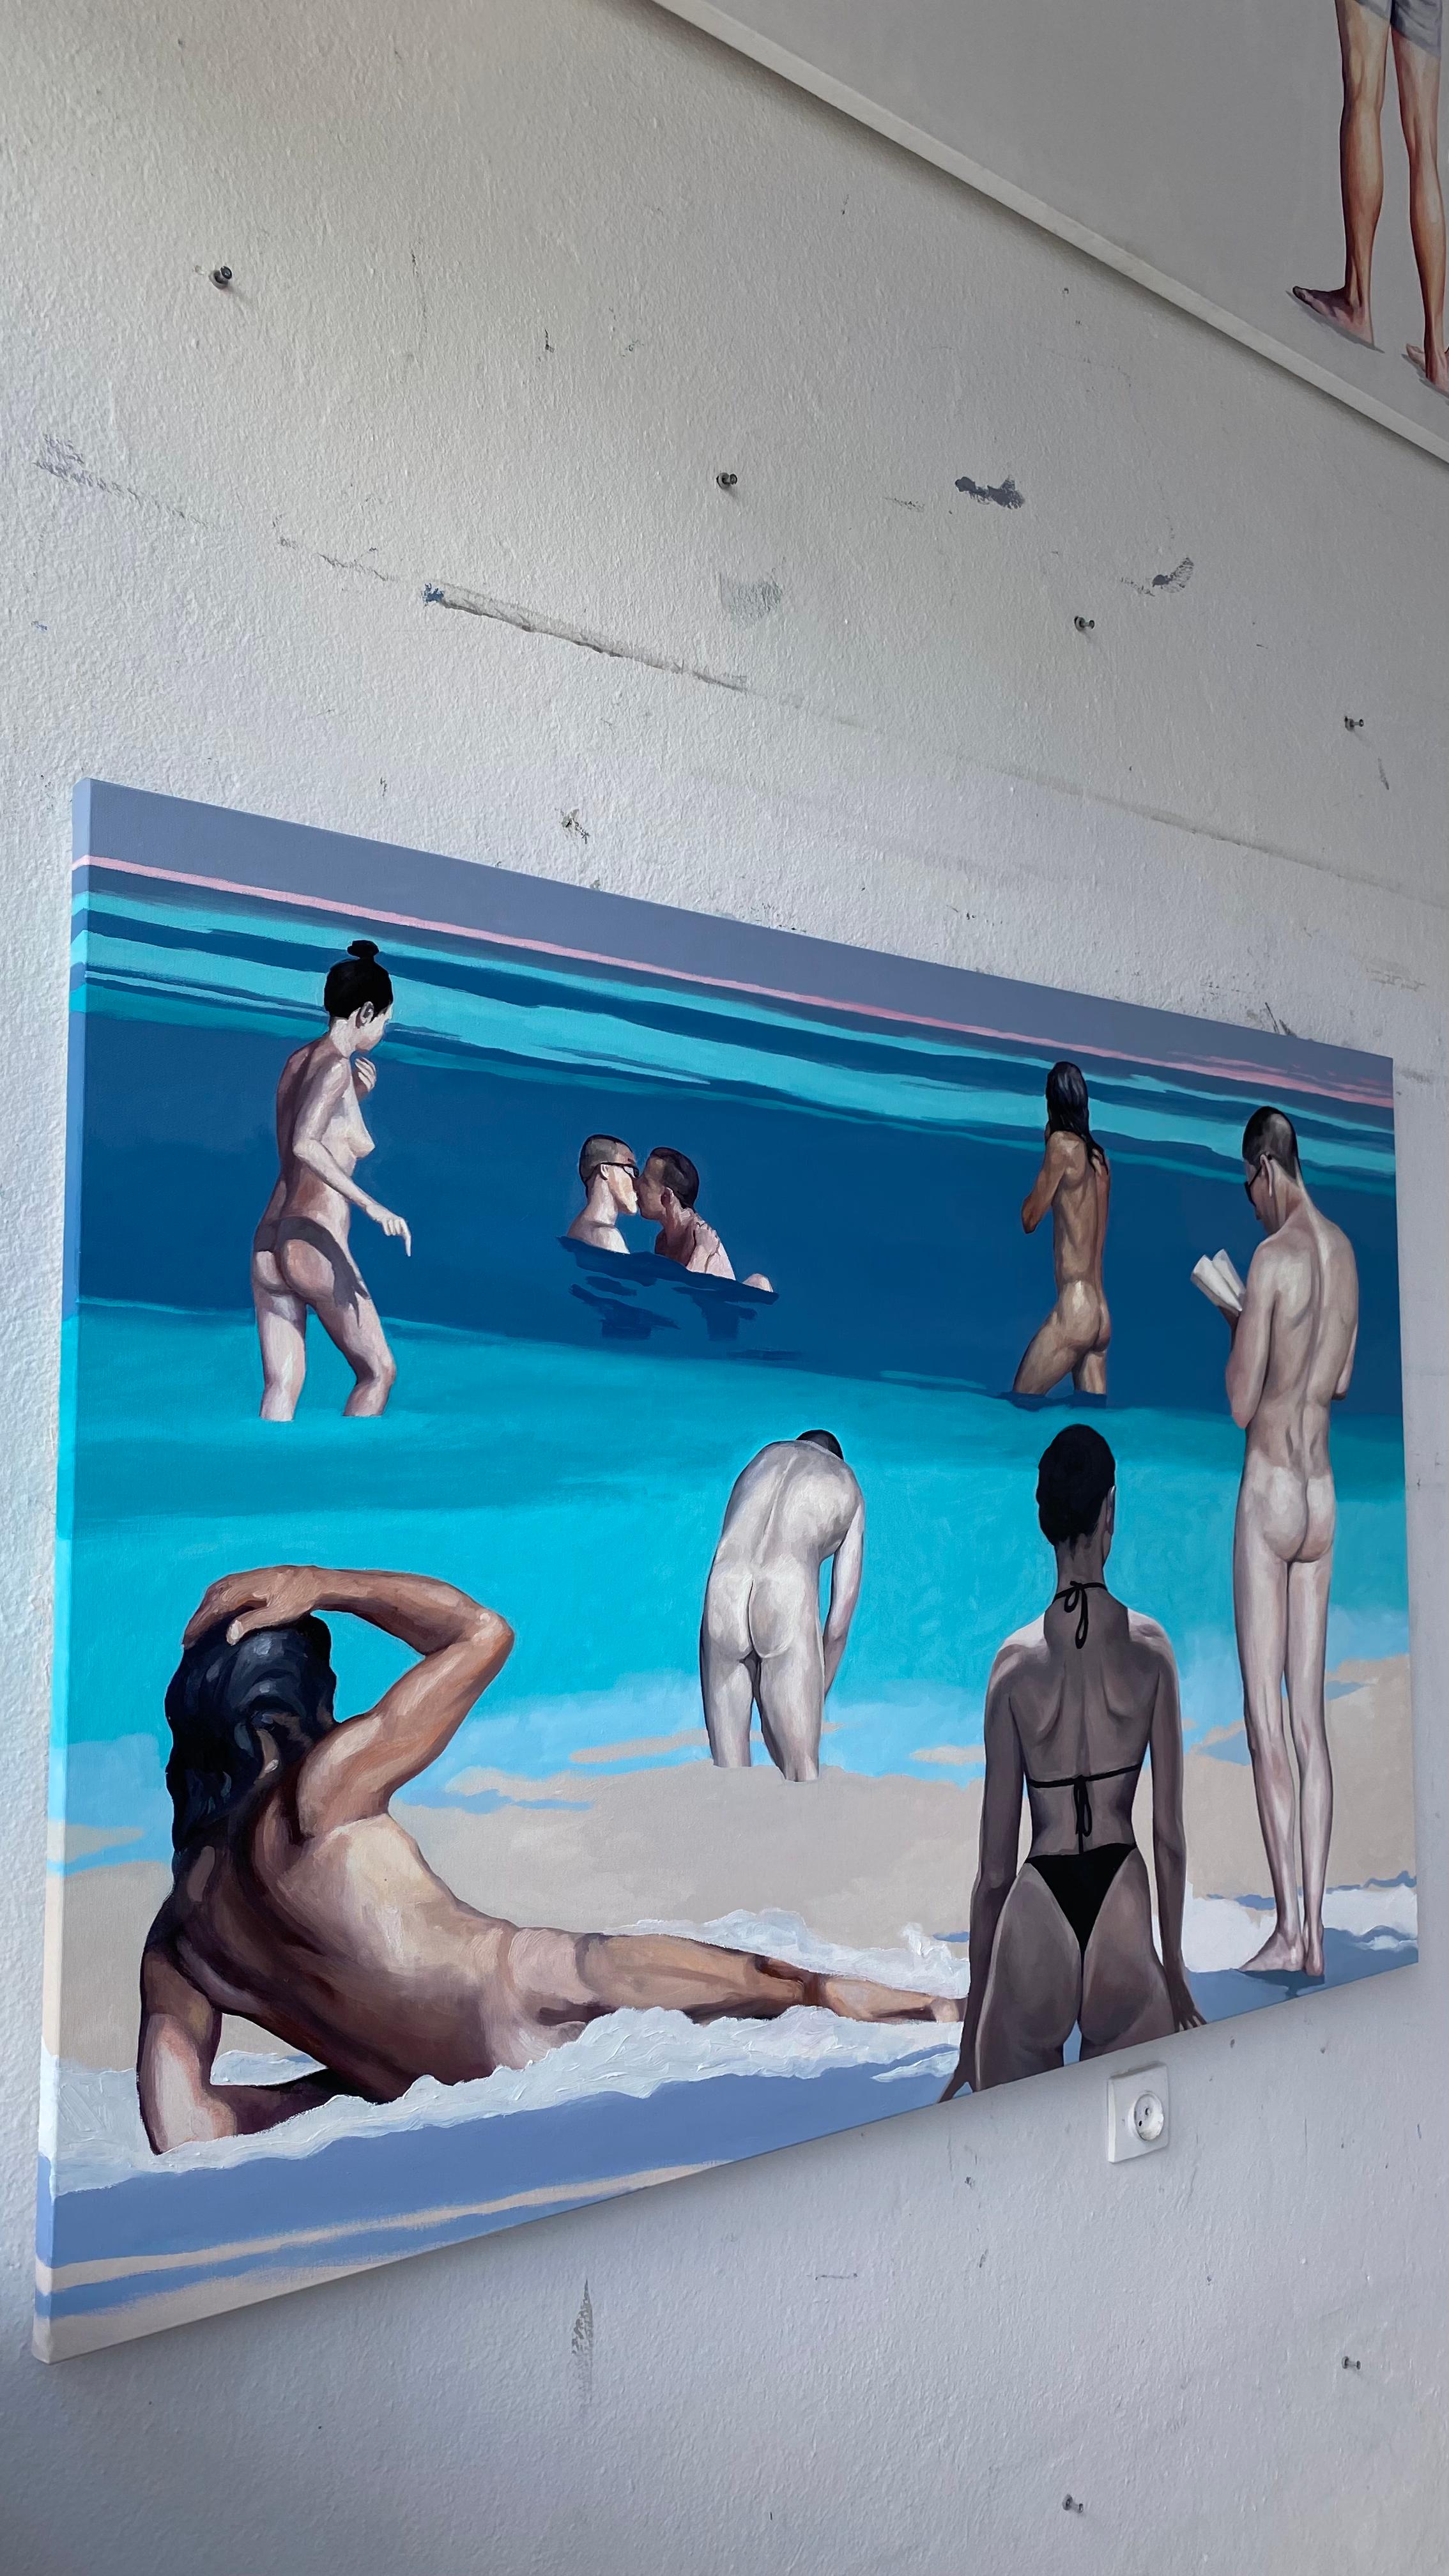 Dialogue V - Contemporary Figurative Oil Painting, Beach View, People, Nude  - Blue Nude Painting by Julita Malinowska